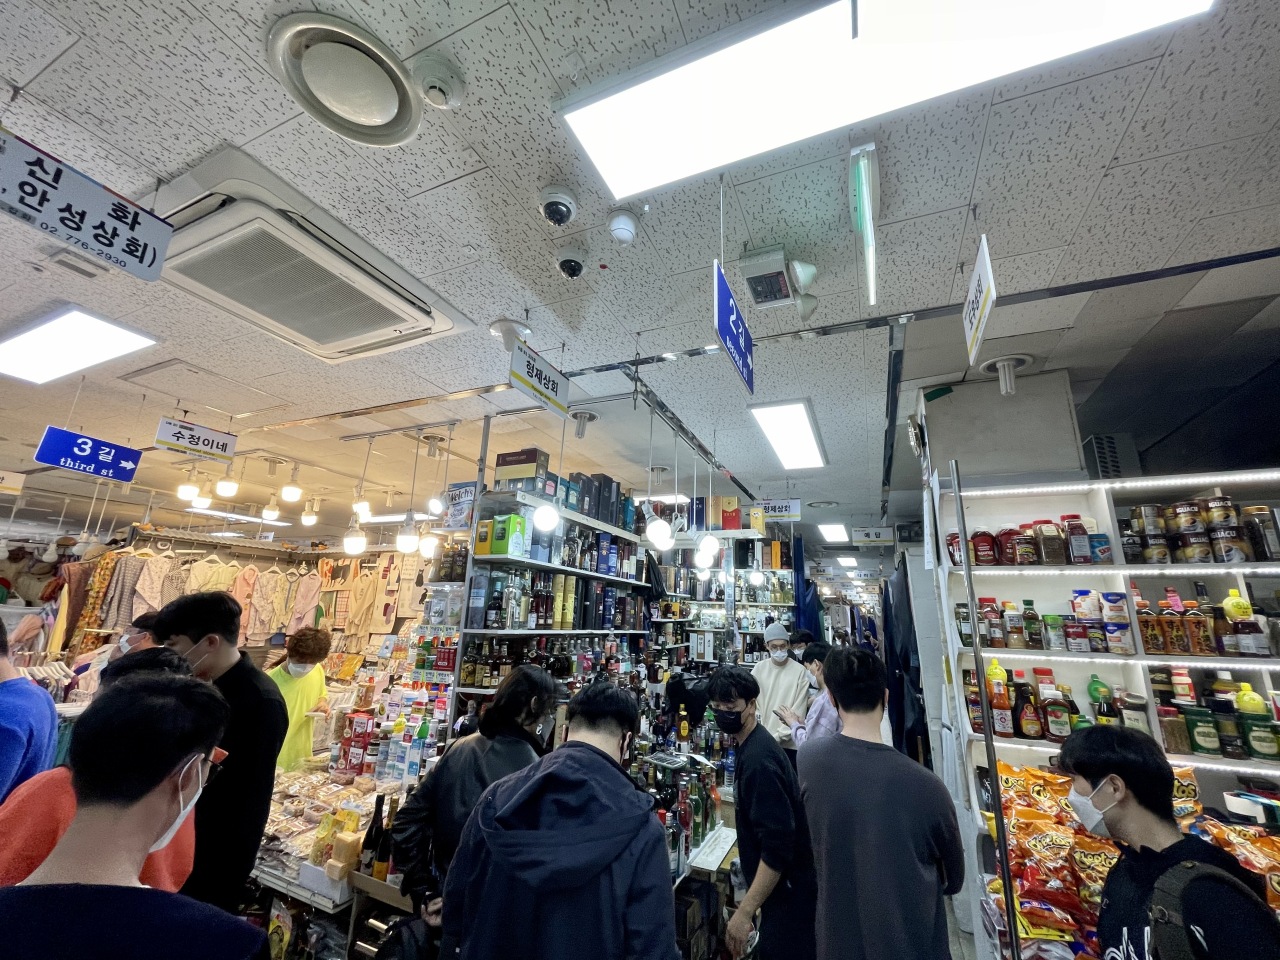 Namdaemun Market’s liquor shopping mall is packed with customers on a Saturday afternoon. (Im Eun-byel / The Korea Herald)